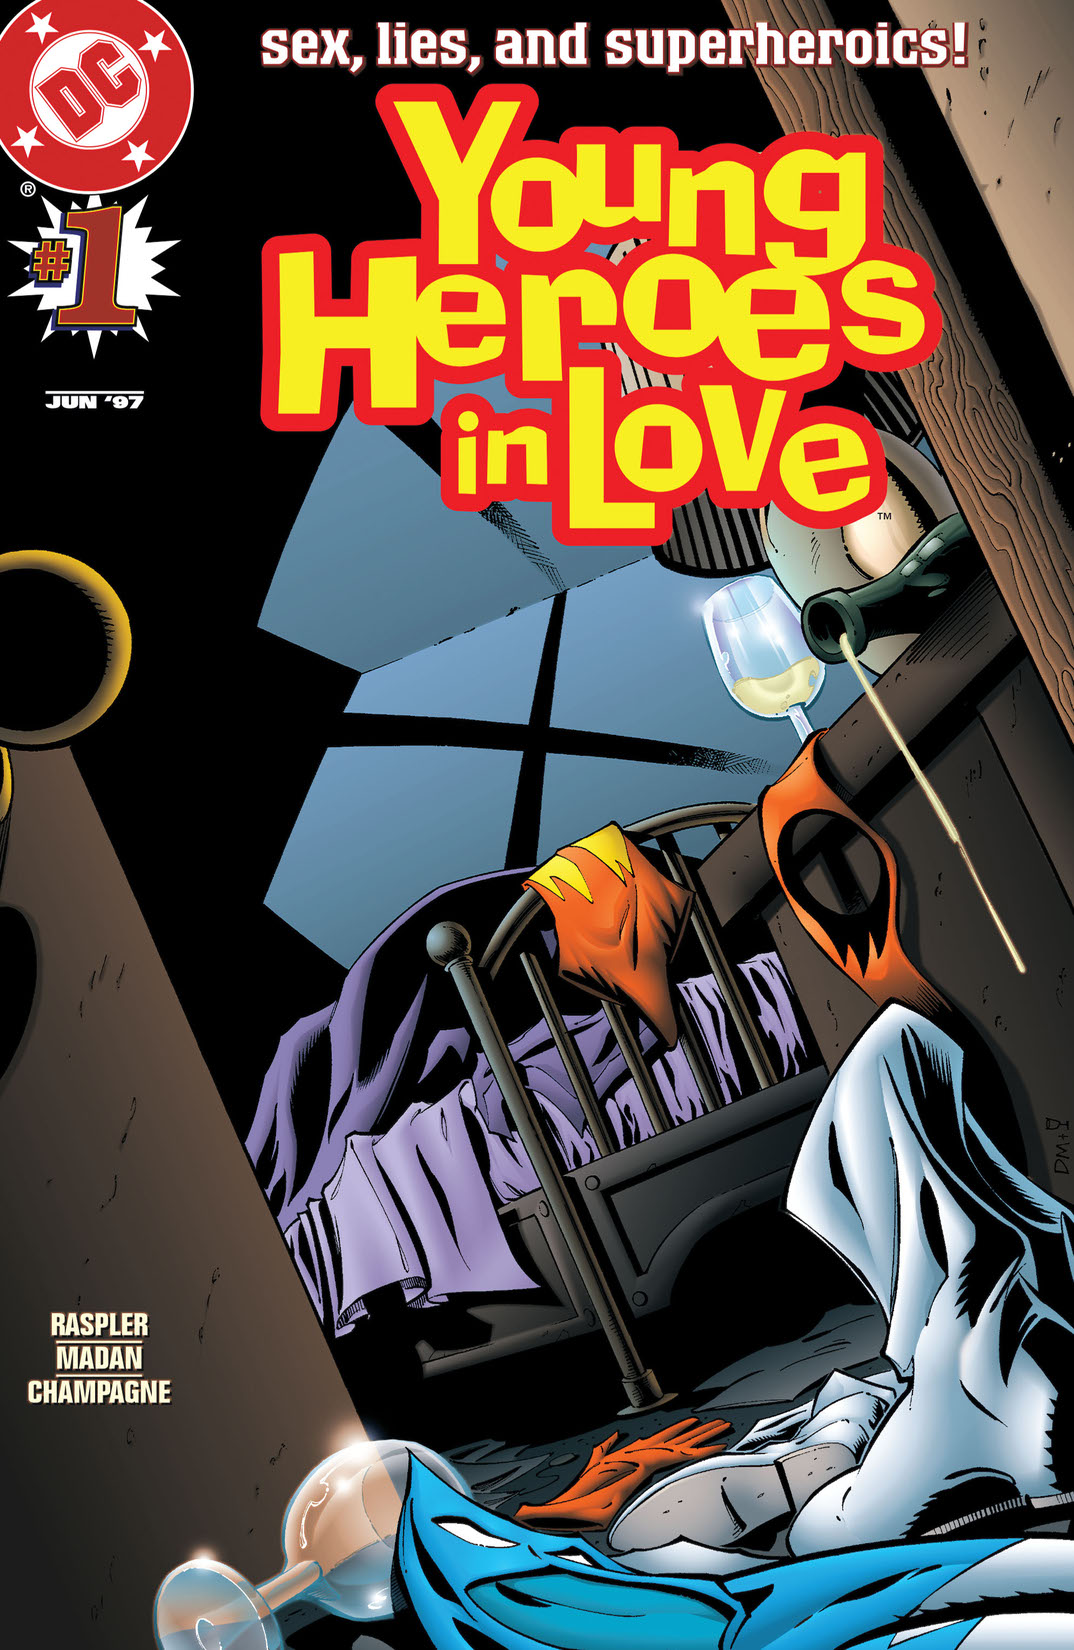 Young Heroes in Love #1 preview images